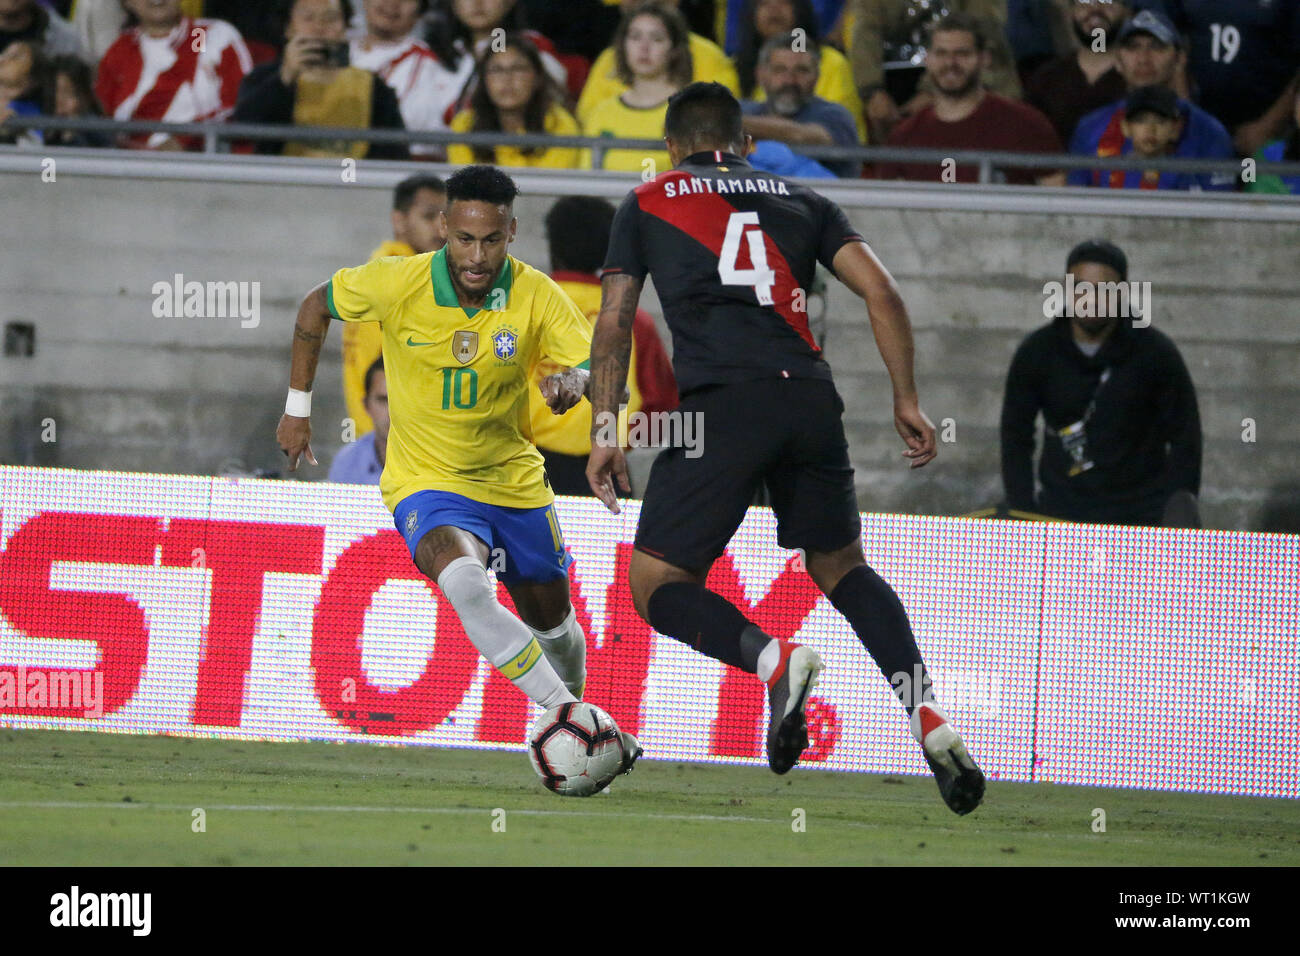 Los Angeles, California, USA. 10th Sep, 2019. Brazil forward Neymar Jr. (10) drives against Peru defender Anderson Santamaria (4) during an International Friendly Soccer match between Brazil and Peru at the Los Angeles Memorial Coliseum in Los Angeles on Tuesday, September 10, 2019. Credit: Ringo Chiu/ZUMA Wire/Alamy Live News Stock Photo